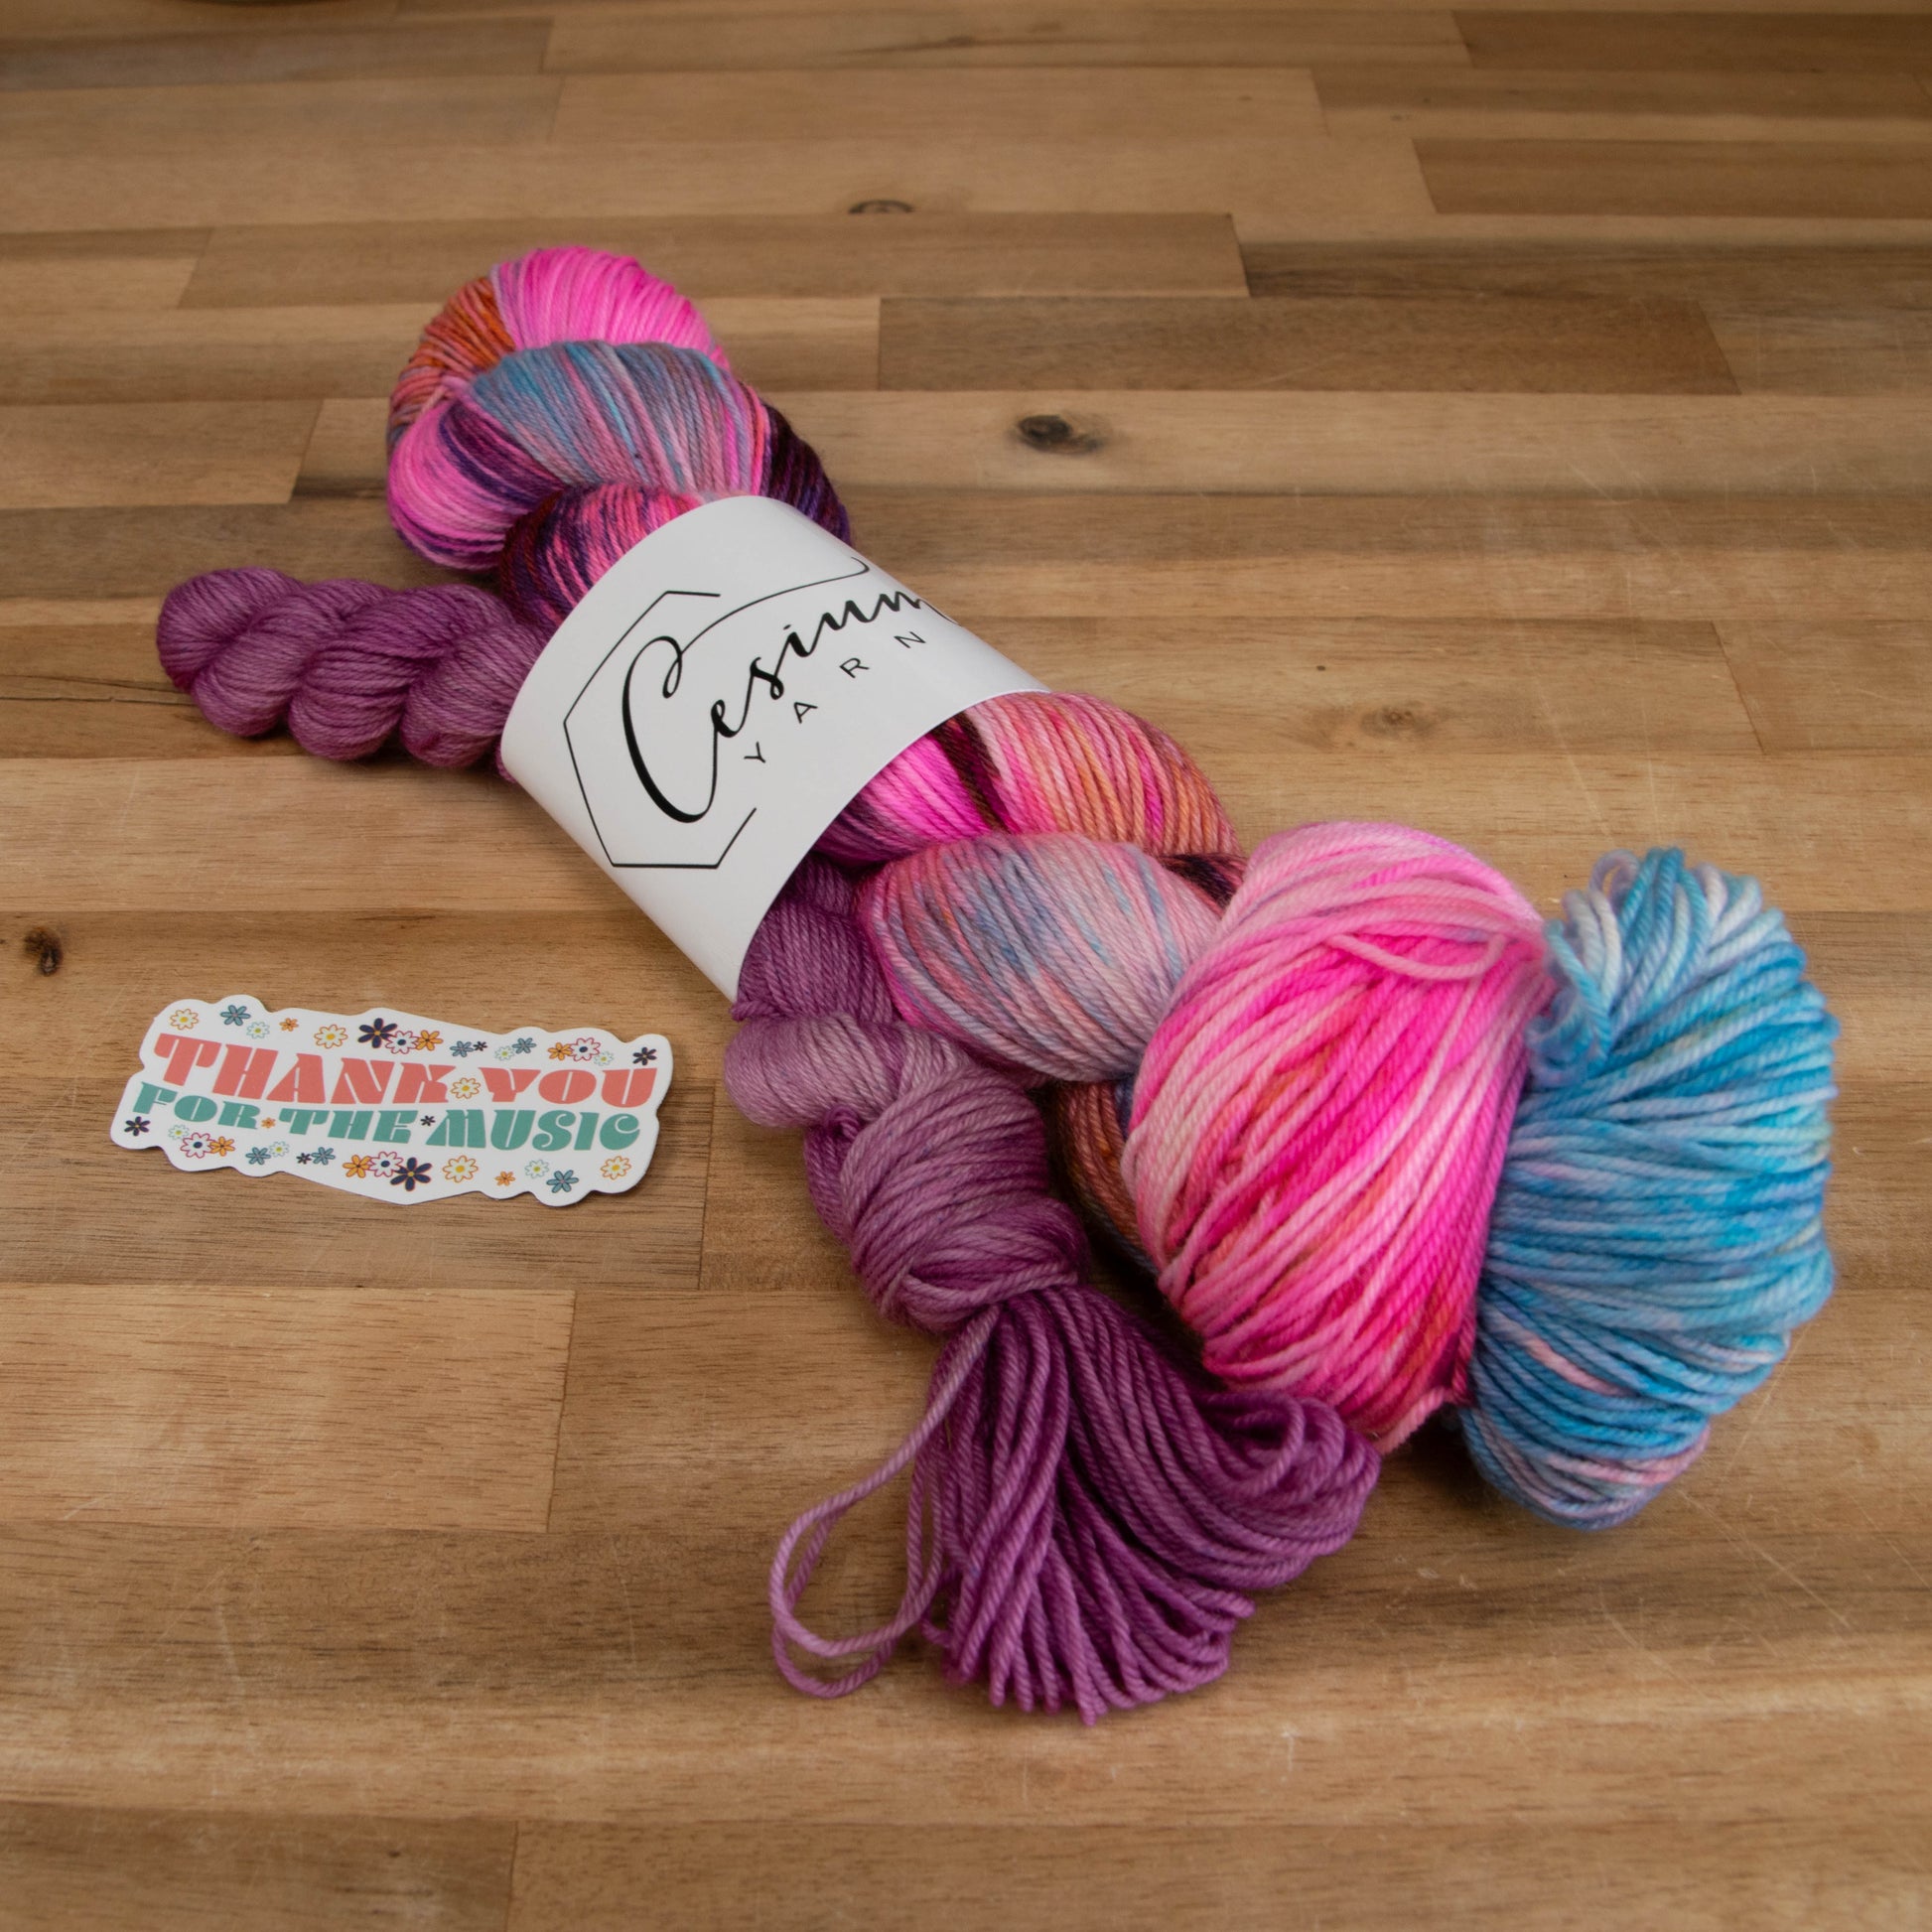 A skein of bright pink, blue, orange, and purple yarn next to a purple mini skein and a sticker that says "Thank you for the music."